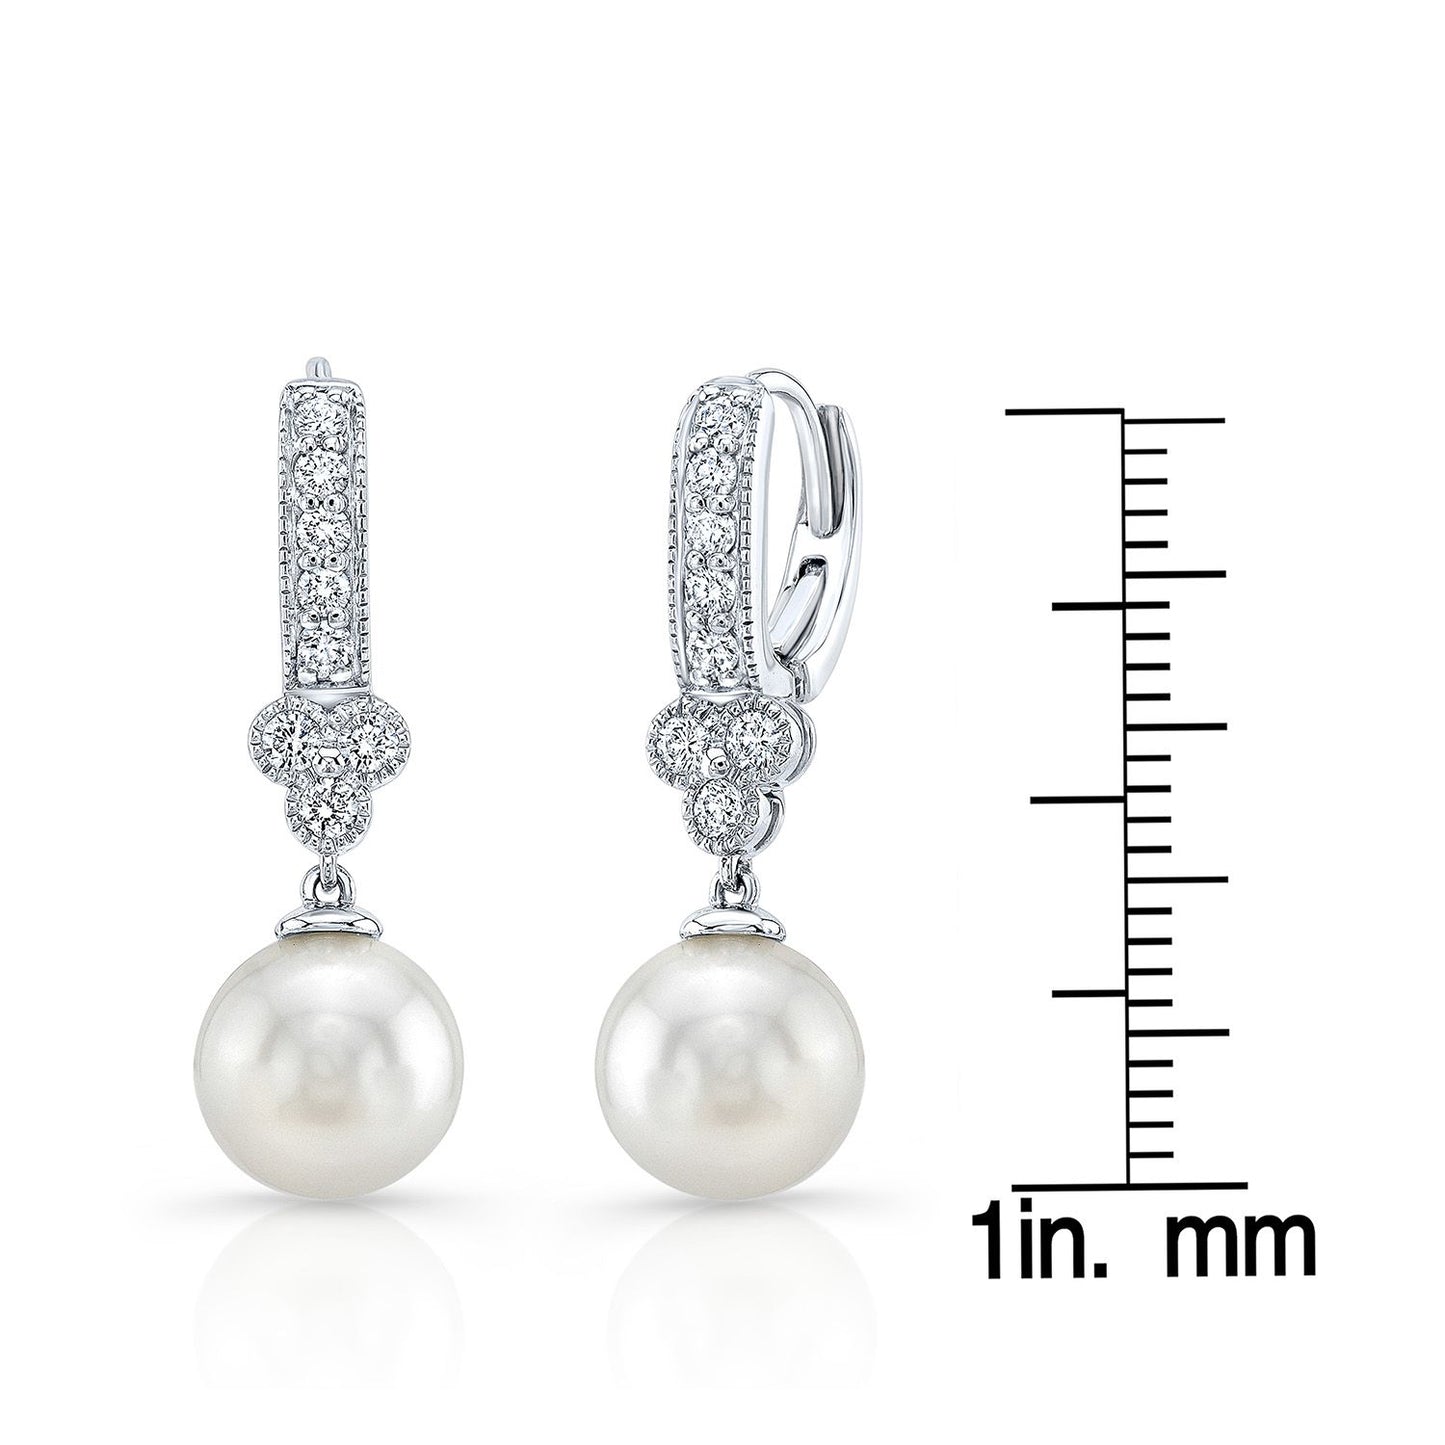 White Pearl And Diamond Dangle Earrings With Clover Top & Miillgrain Detail (8.0-8.5mm) (si)